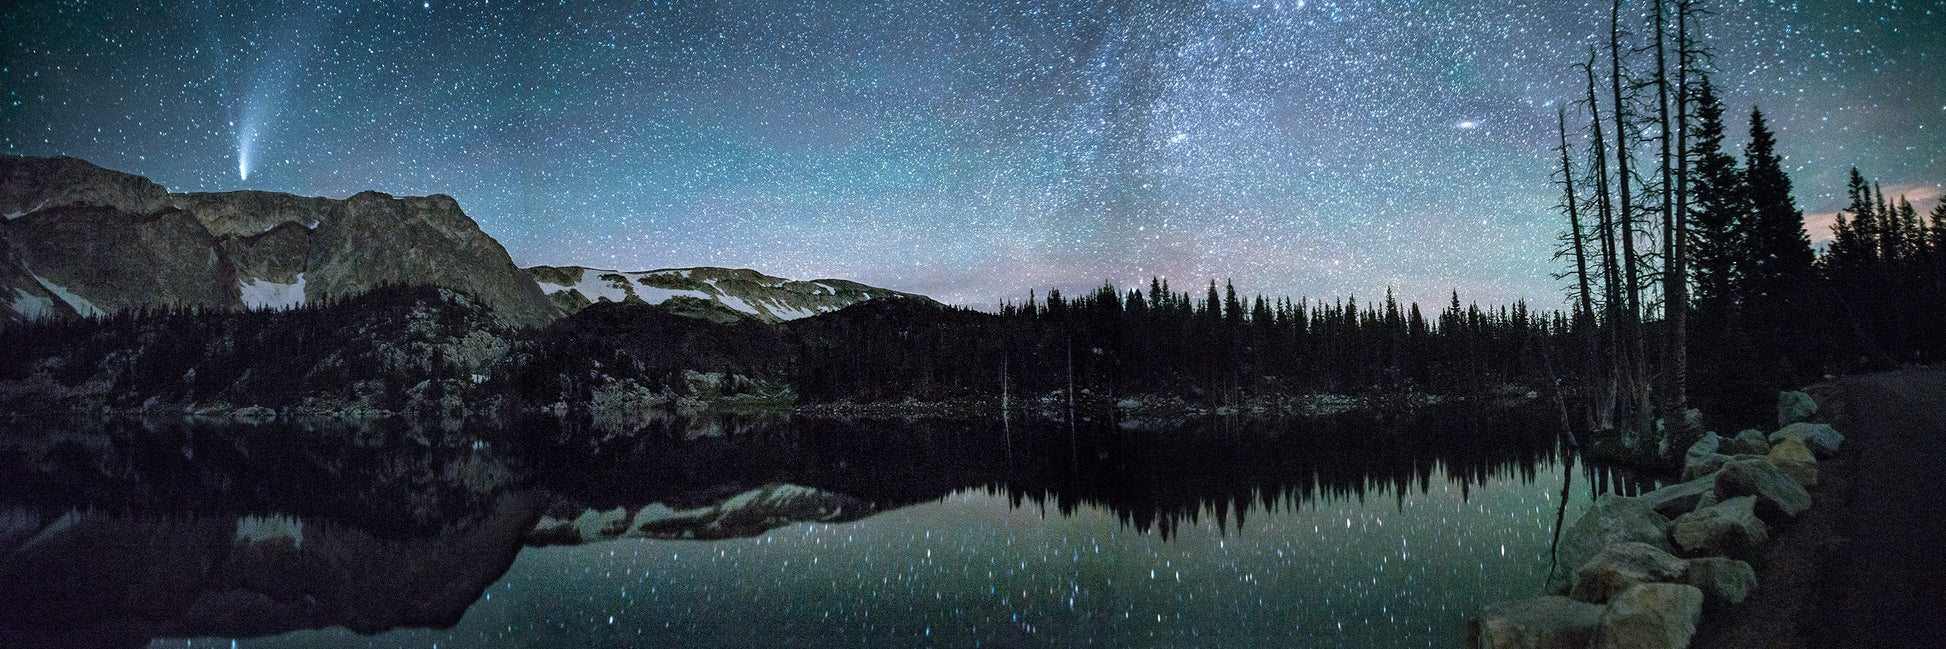 Mirror Lake, Comet Neowise, Milky Way and Andromeda Galaxy print. Used for cards and bookmarks as well